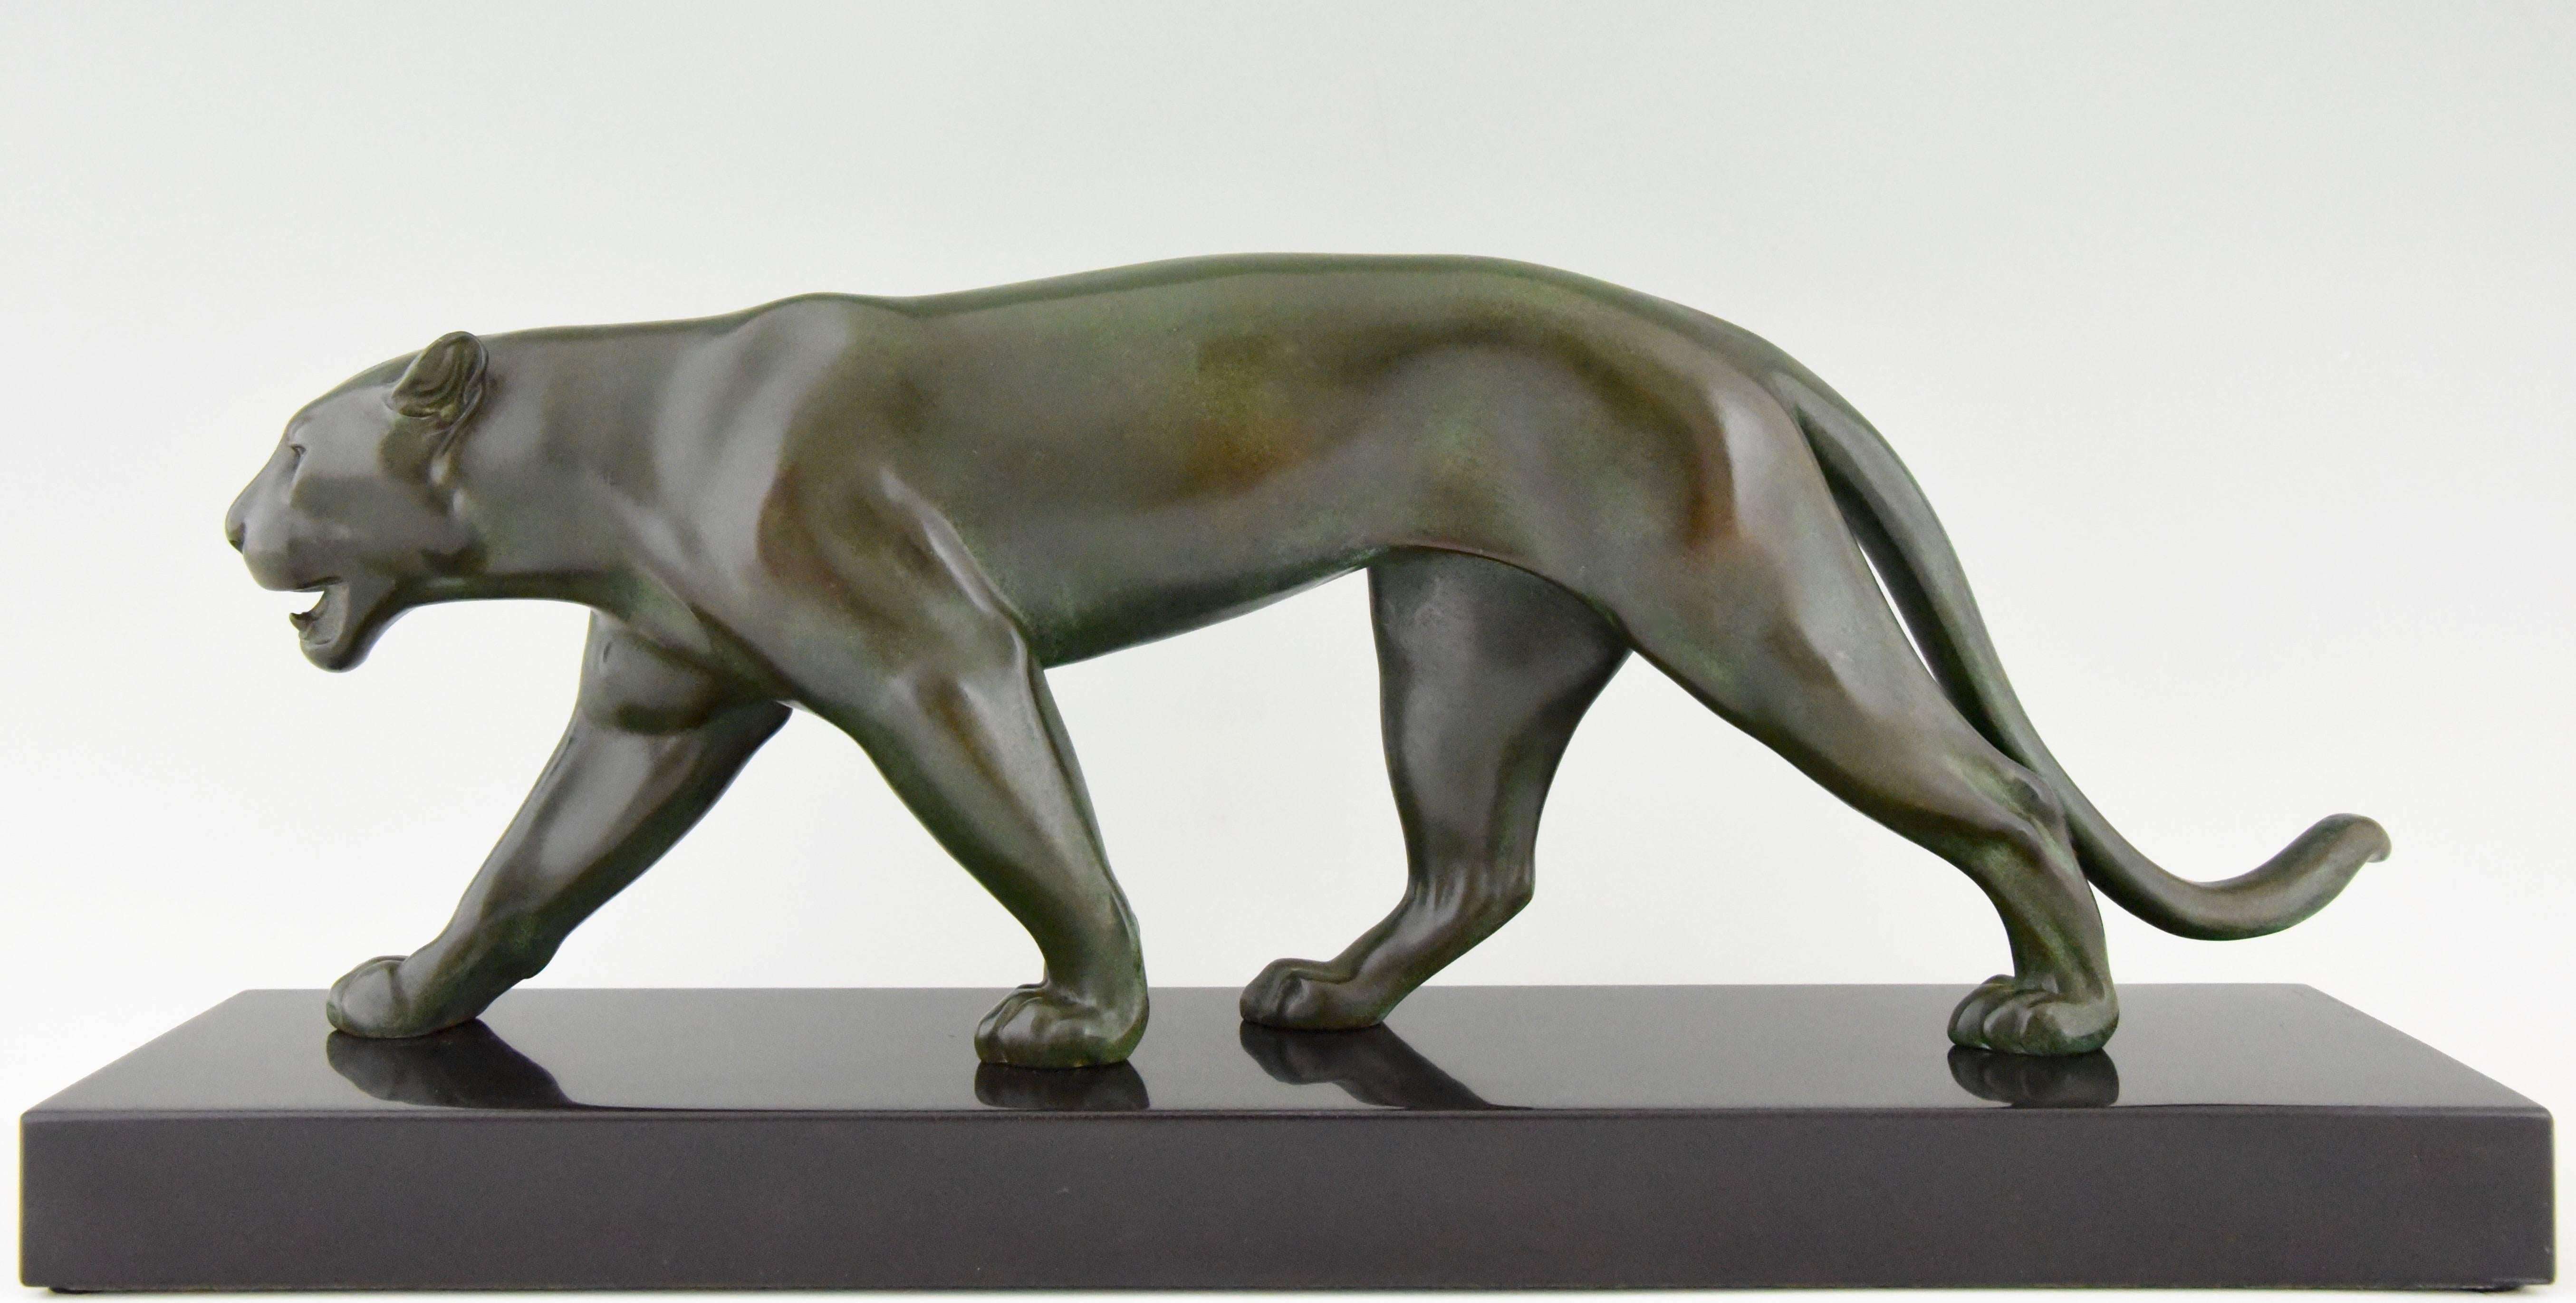 Very nice Art Deco panther sculpture by the famous French artist Max Le Verrier. Lovely green patina on Belgian Black marble base.